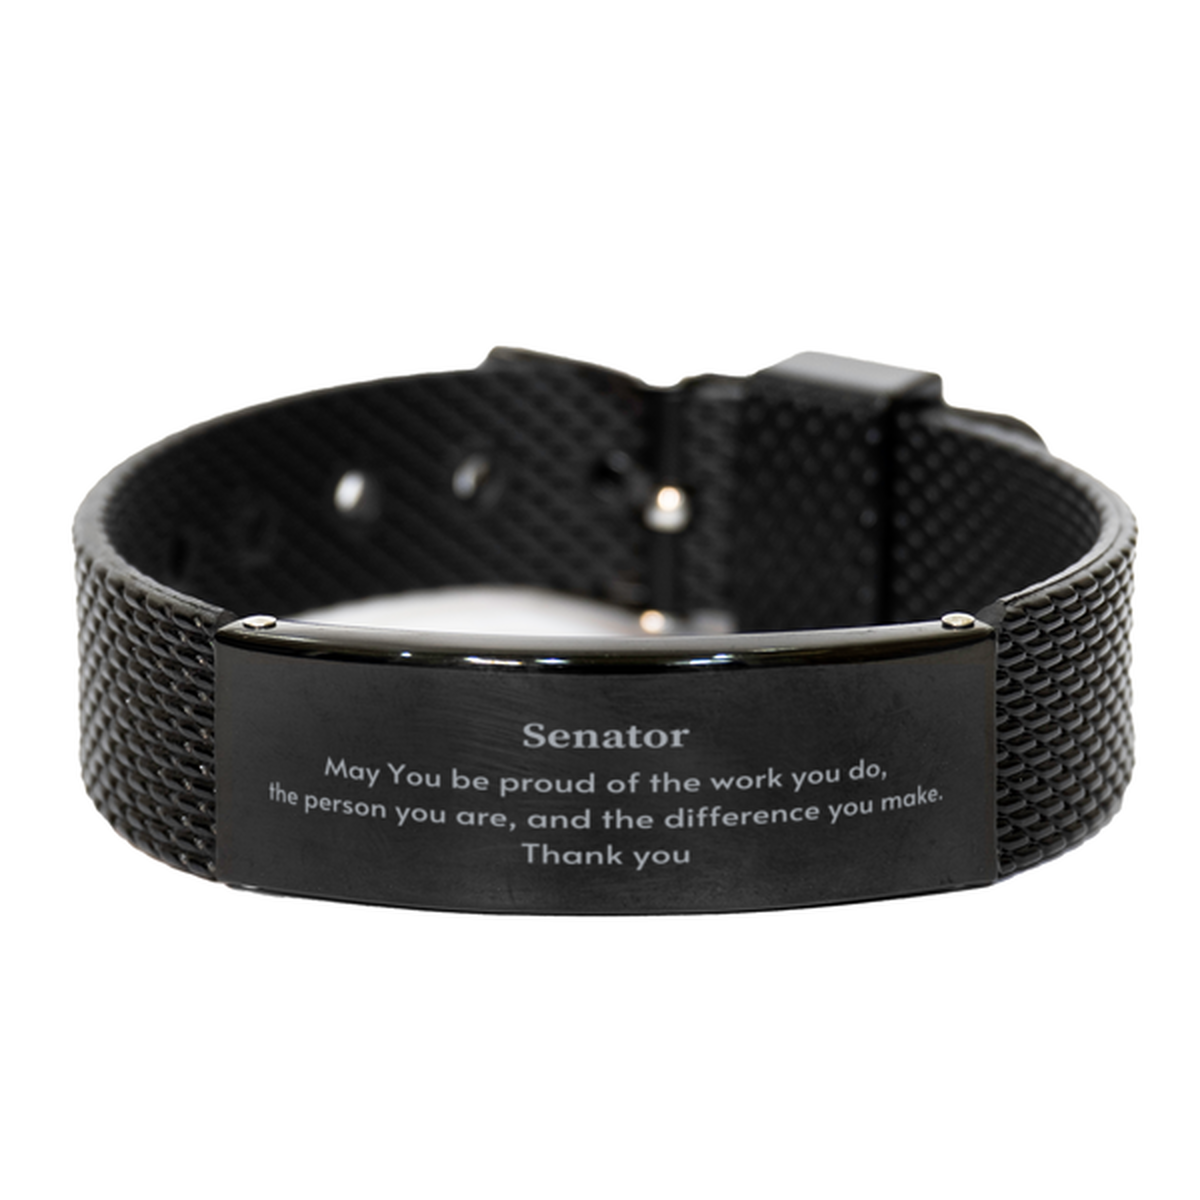 Heartwarming Black Shark Mesh Bracelet Retirement Coworkers Gifts for Senator, Senator May You be proud of the work you do, the person you are Gifts for Boss Men Women Friends